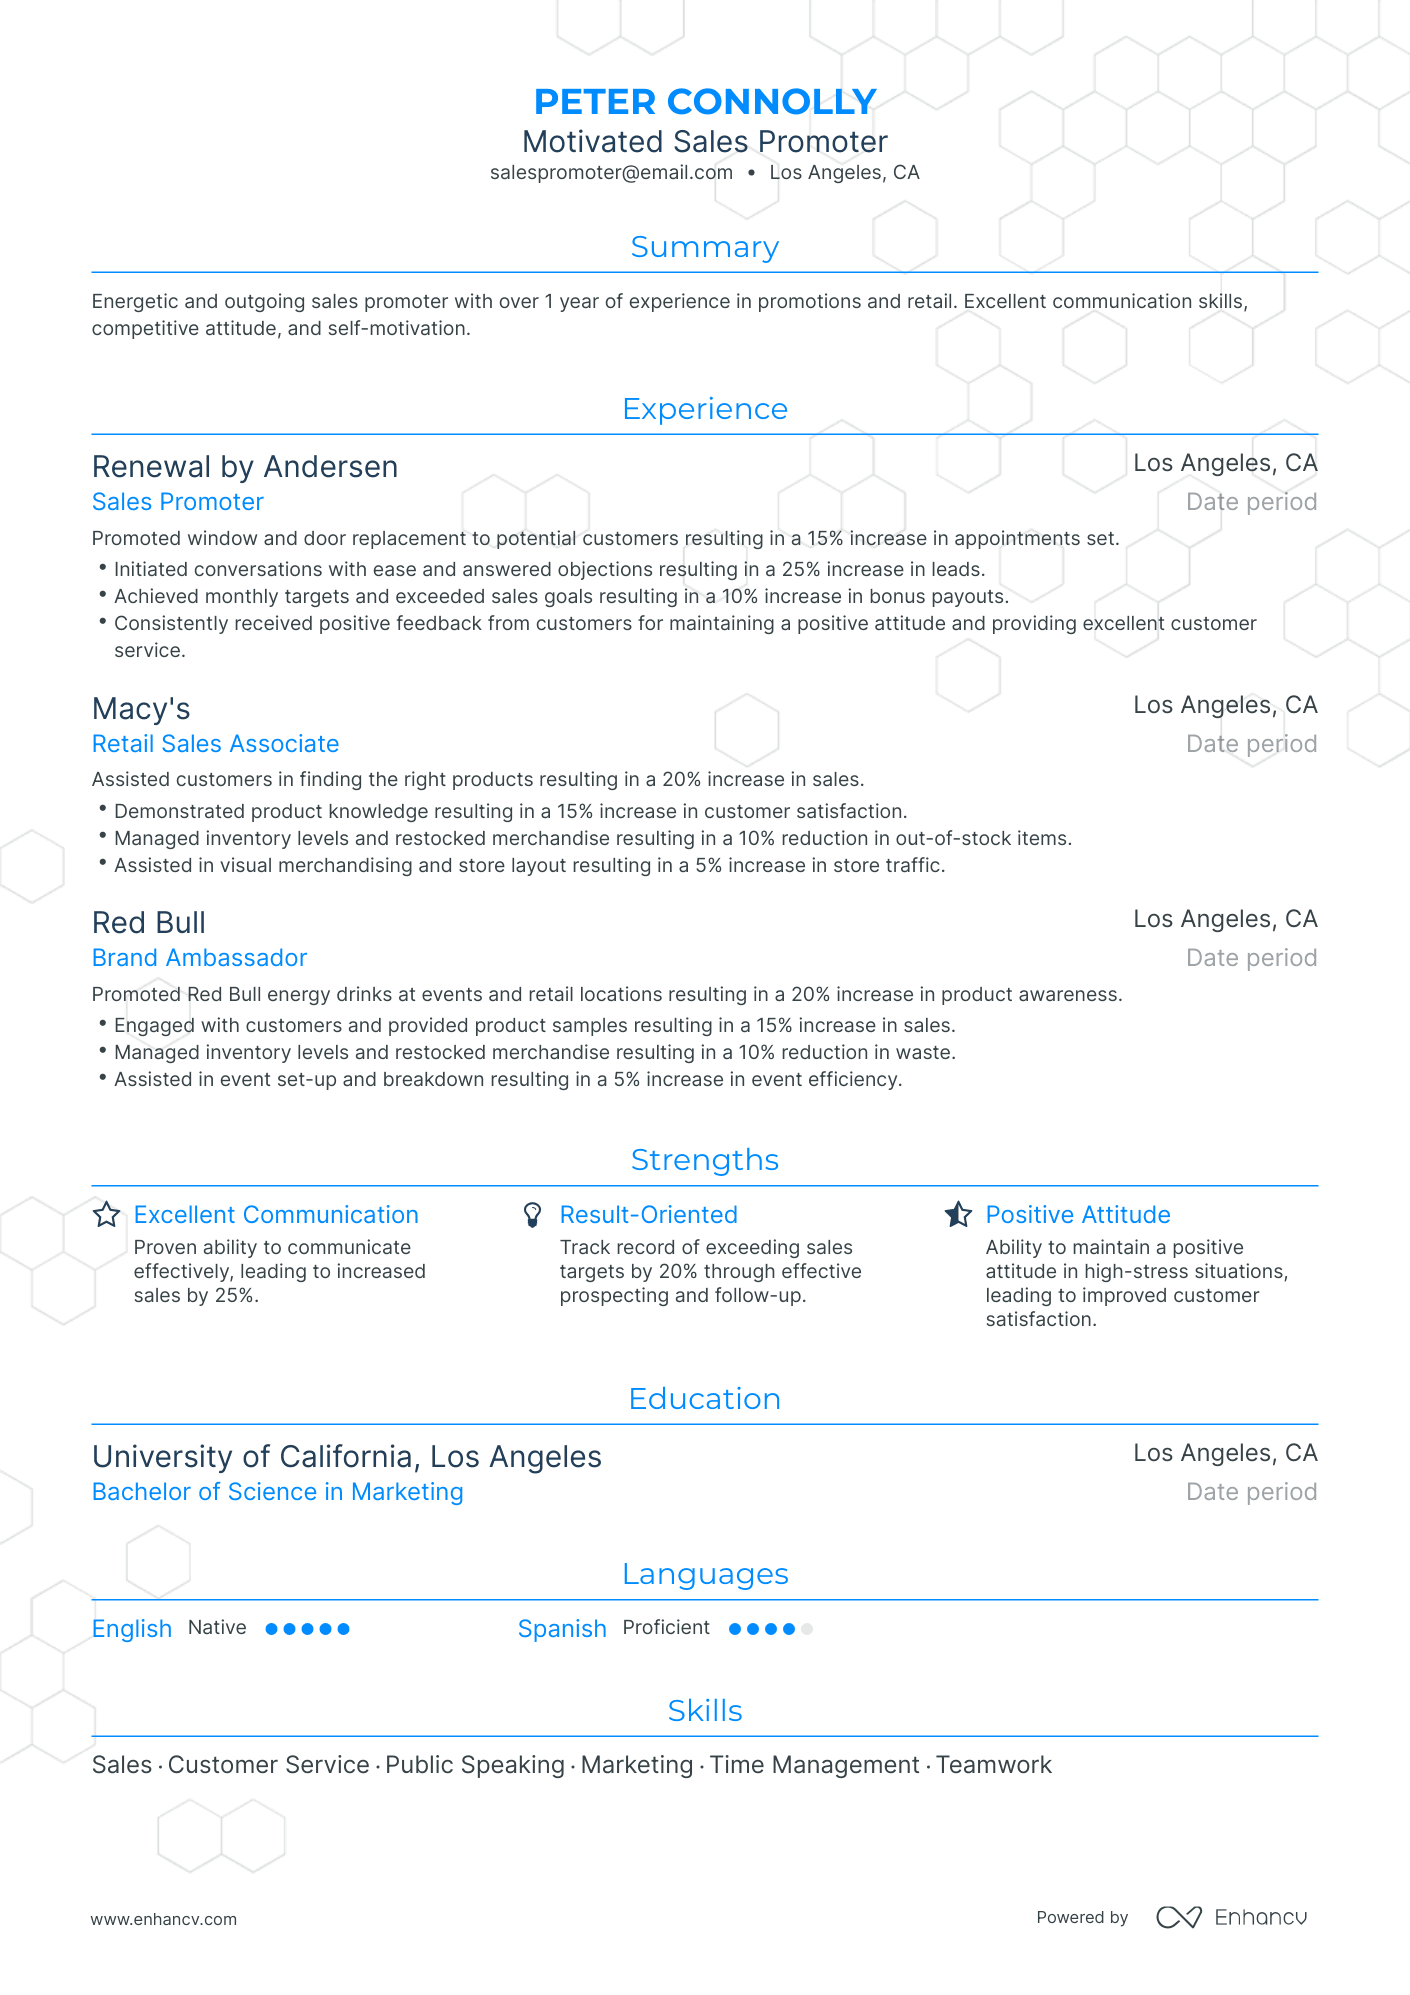 Traditional Sales Promoter Resume Template